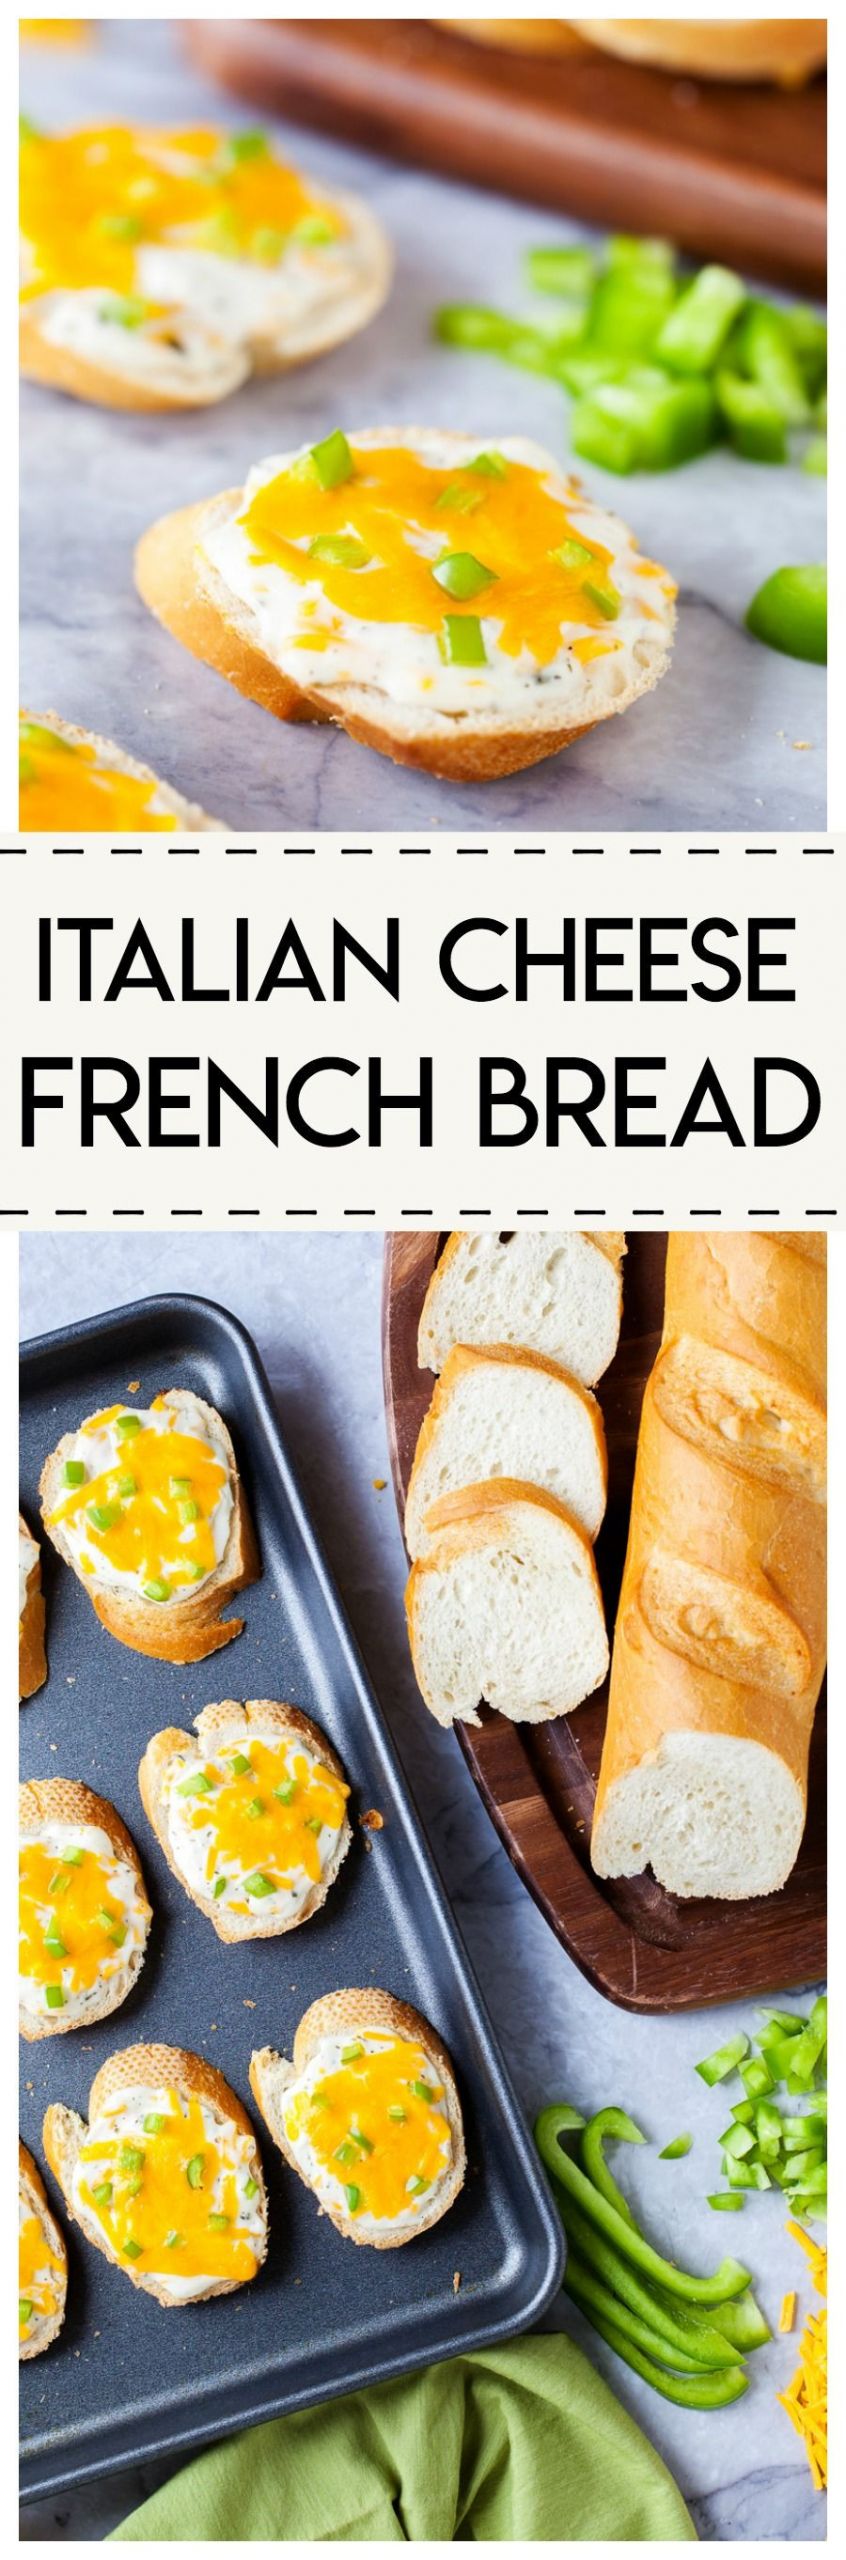 Italian Bread Appetizers
 This Italian Cheese French Bread is a delicious appetizer